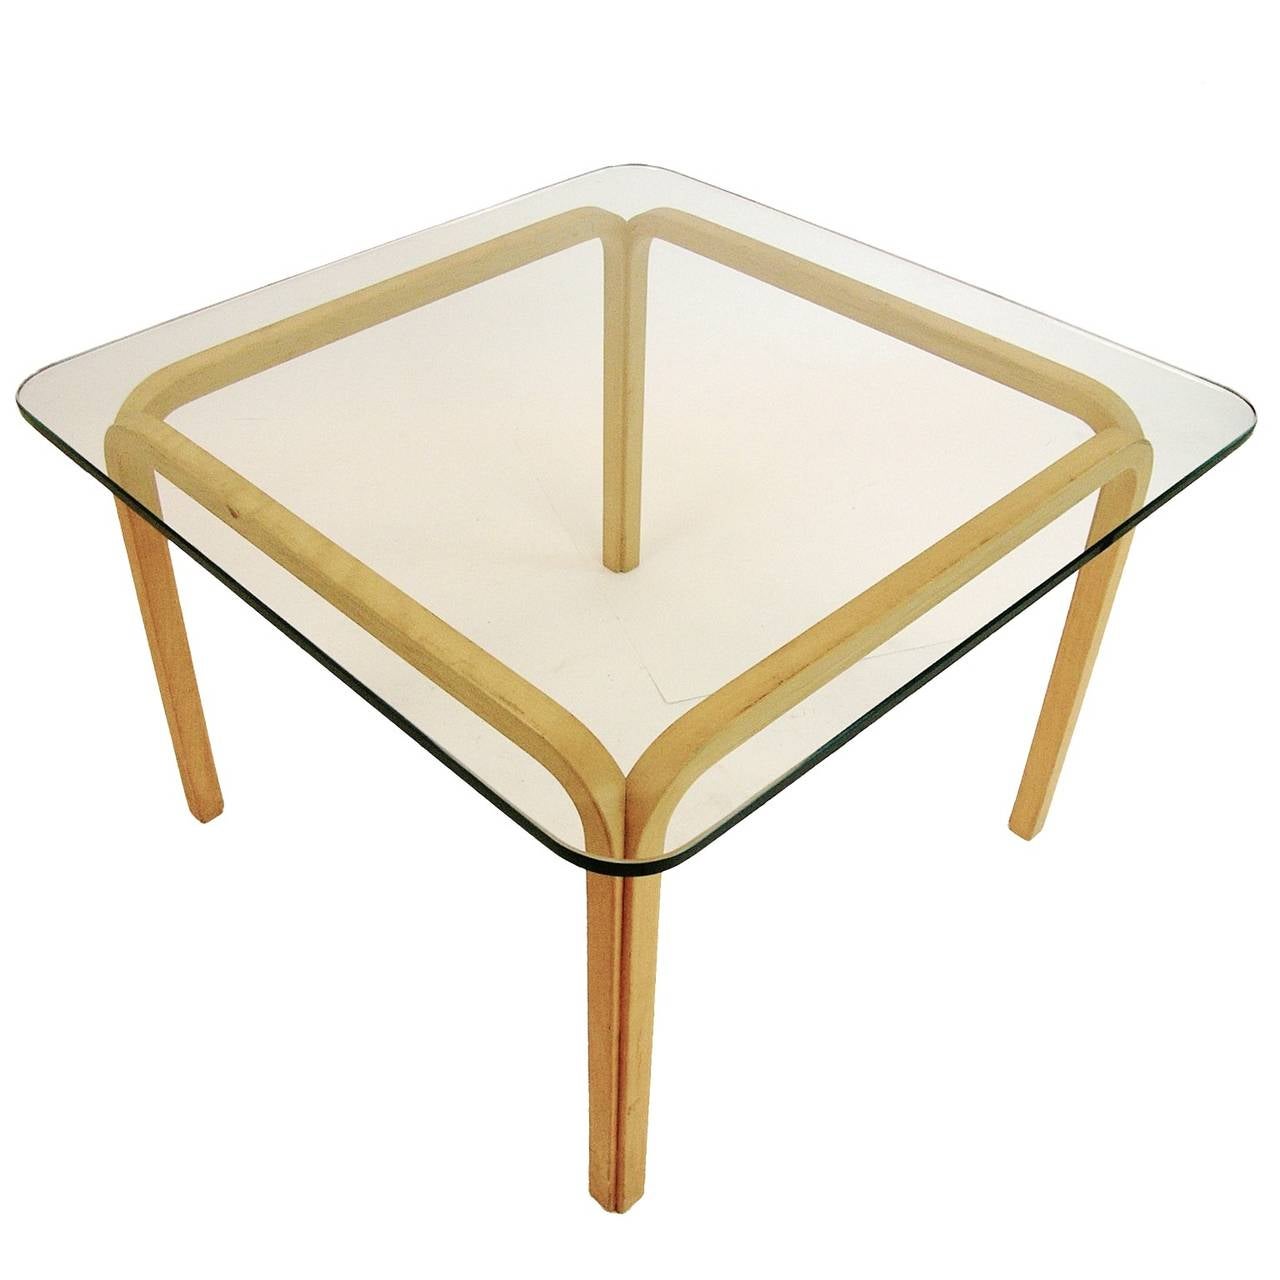 Finnish Alvar Aalto Artek Y805 Glass and Bentwood Birch Coffee or Cocktail Table